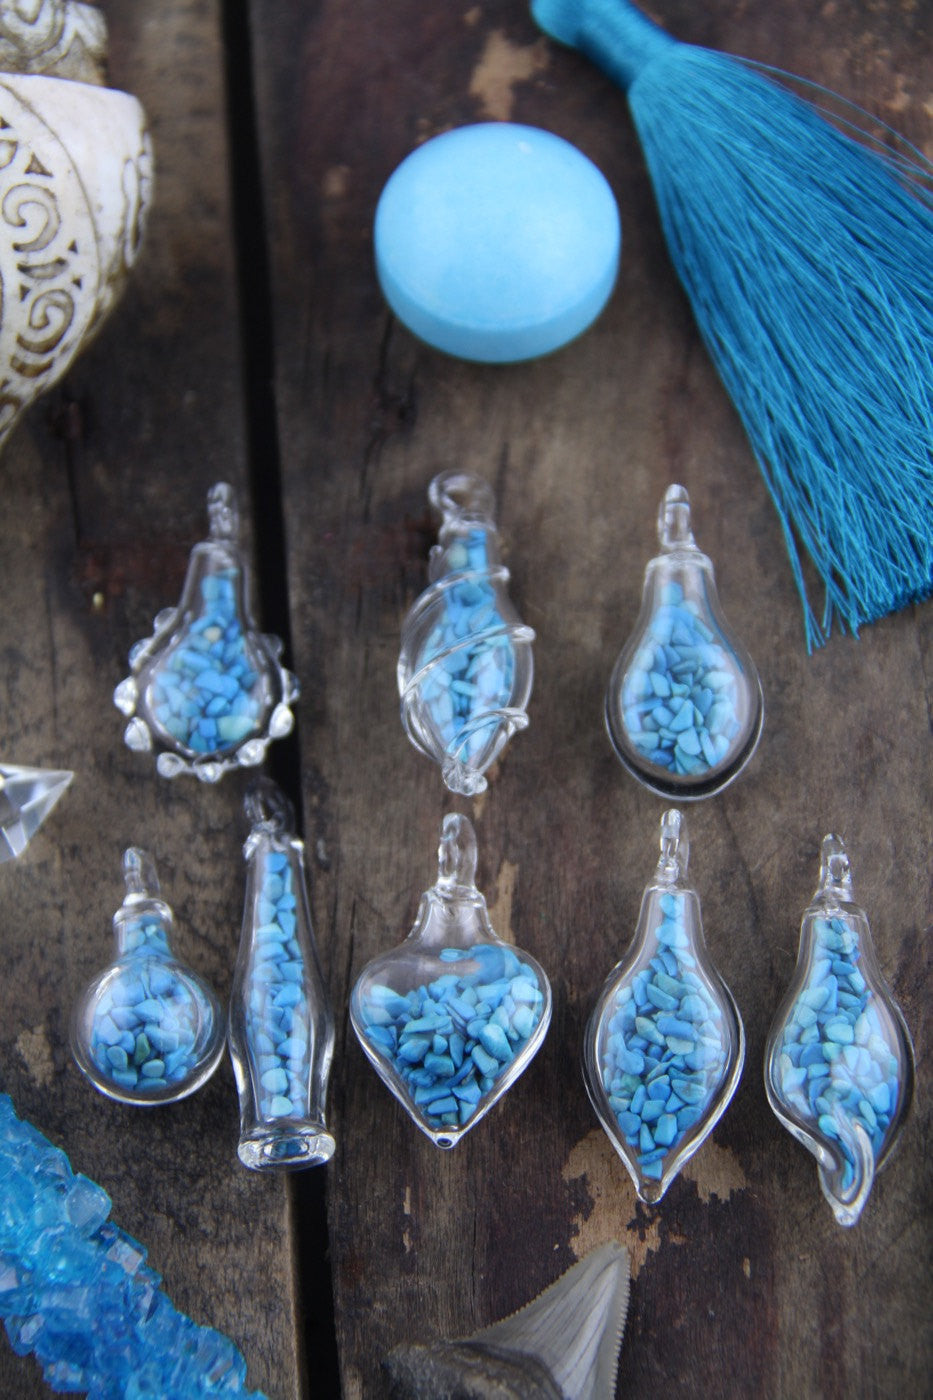 Turquoise Magic: Tiny Glass Bottle Pendant with Turquoise Chips, Choose from 8 Shapes - ShopWomanShopsWorld.com. Bone Beads, Tassels, Pom Poms, African Beads.